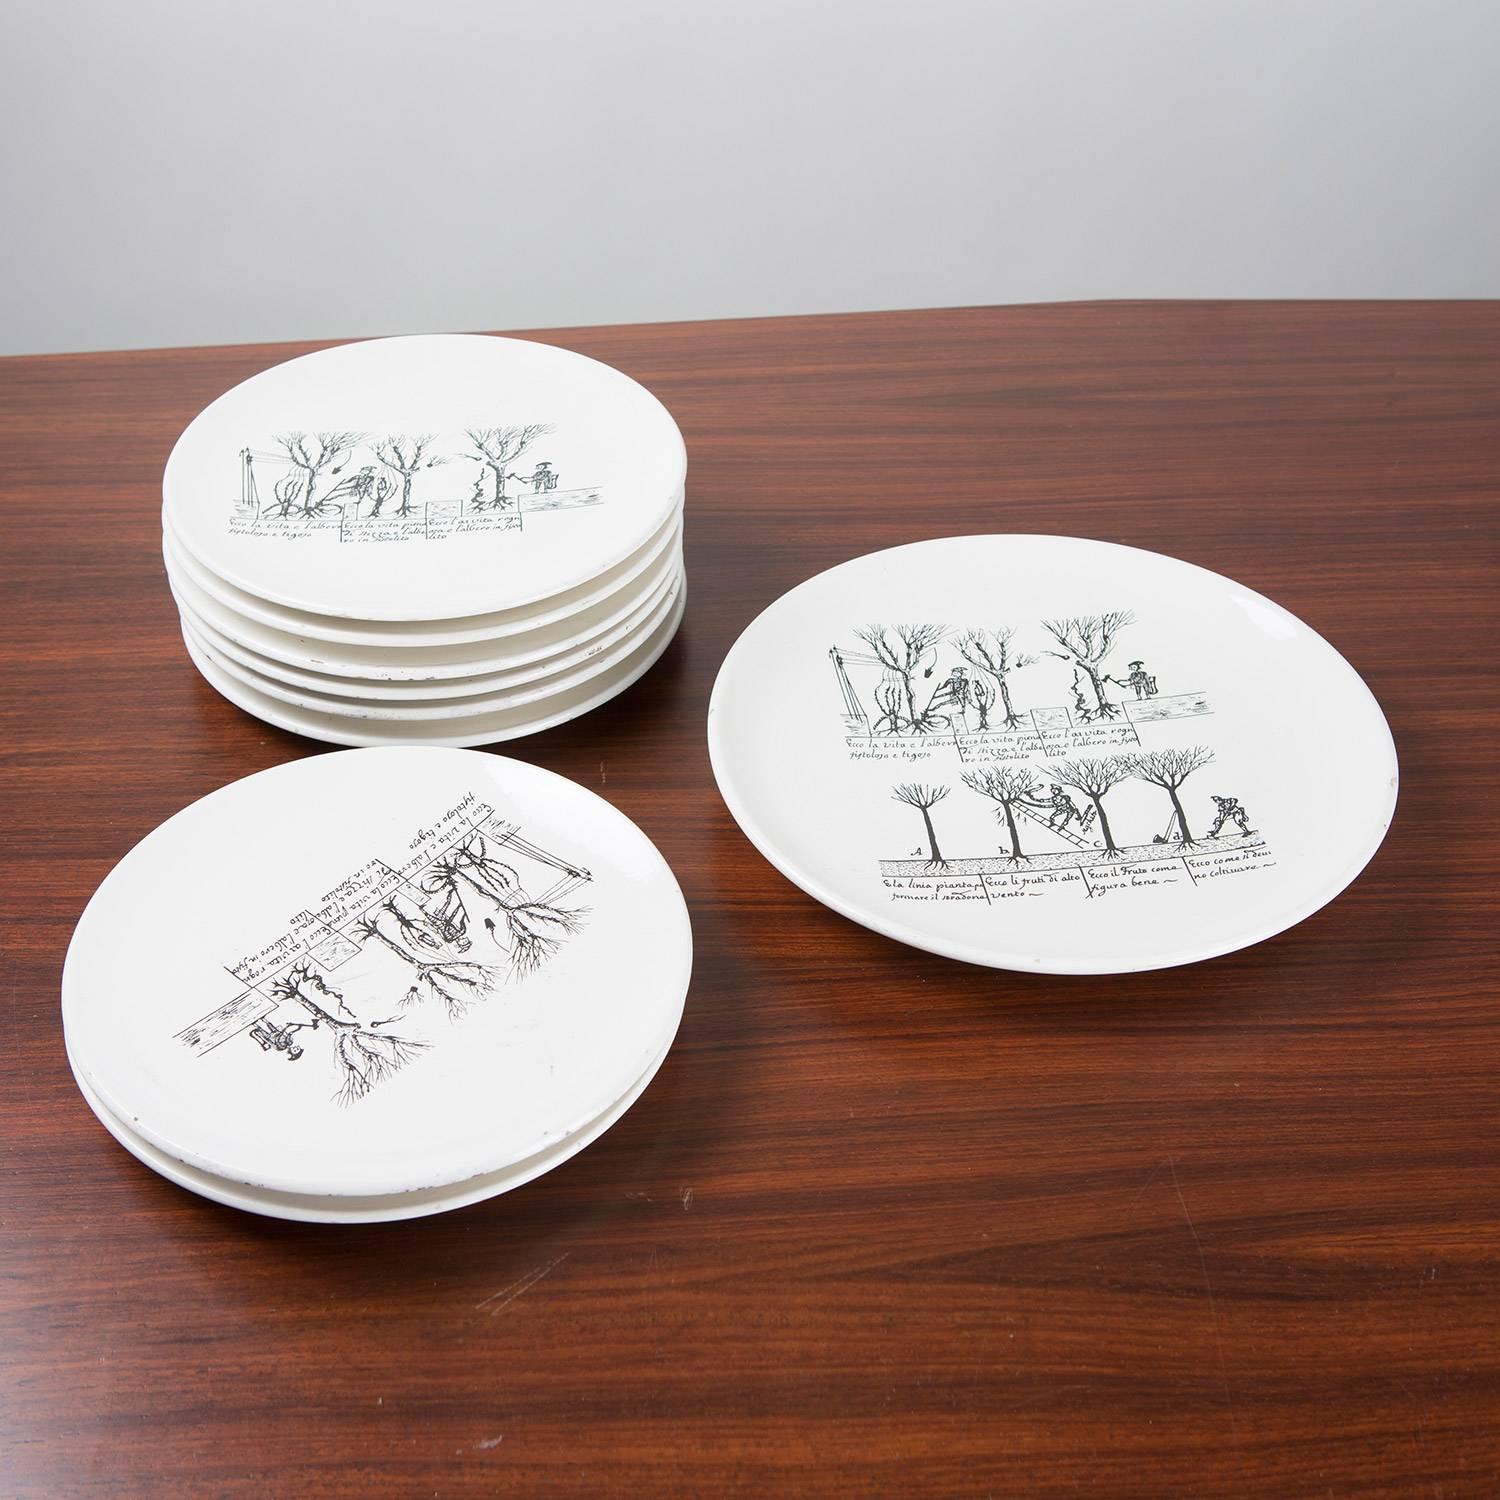 Rare set of 9 ceramic plates by Enzo Bioli for Il Picchio.
8 dining plates and another bigger piece. Beautiful drawings with metaphoric depiction.